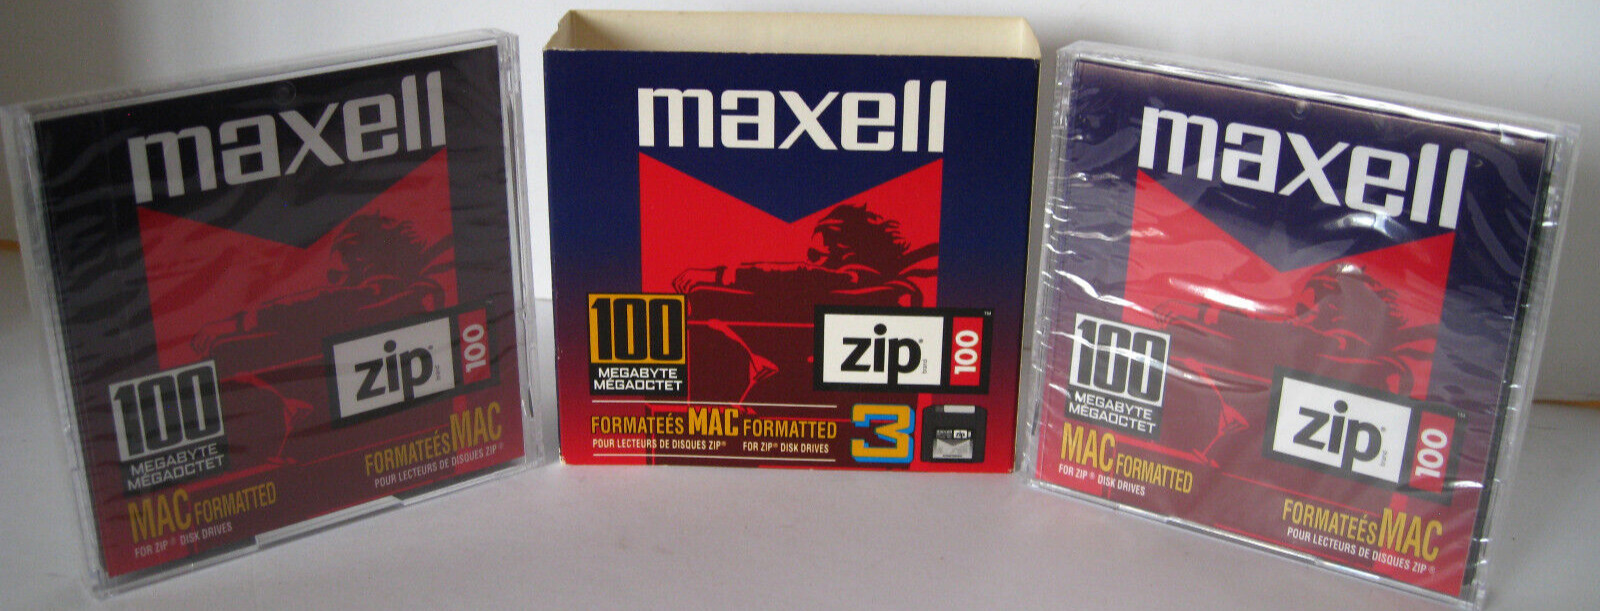 SEALED Maxell Zip 100 MAC formatted 580105 2 pack 100MB Lot of 2 Disks NEW NOS